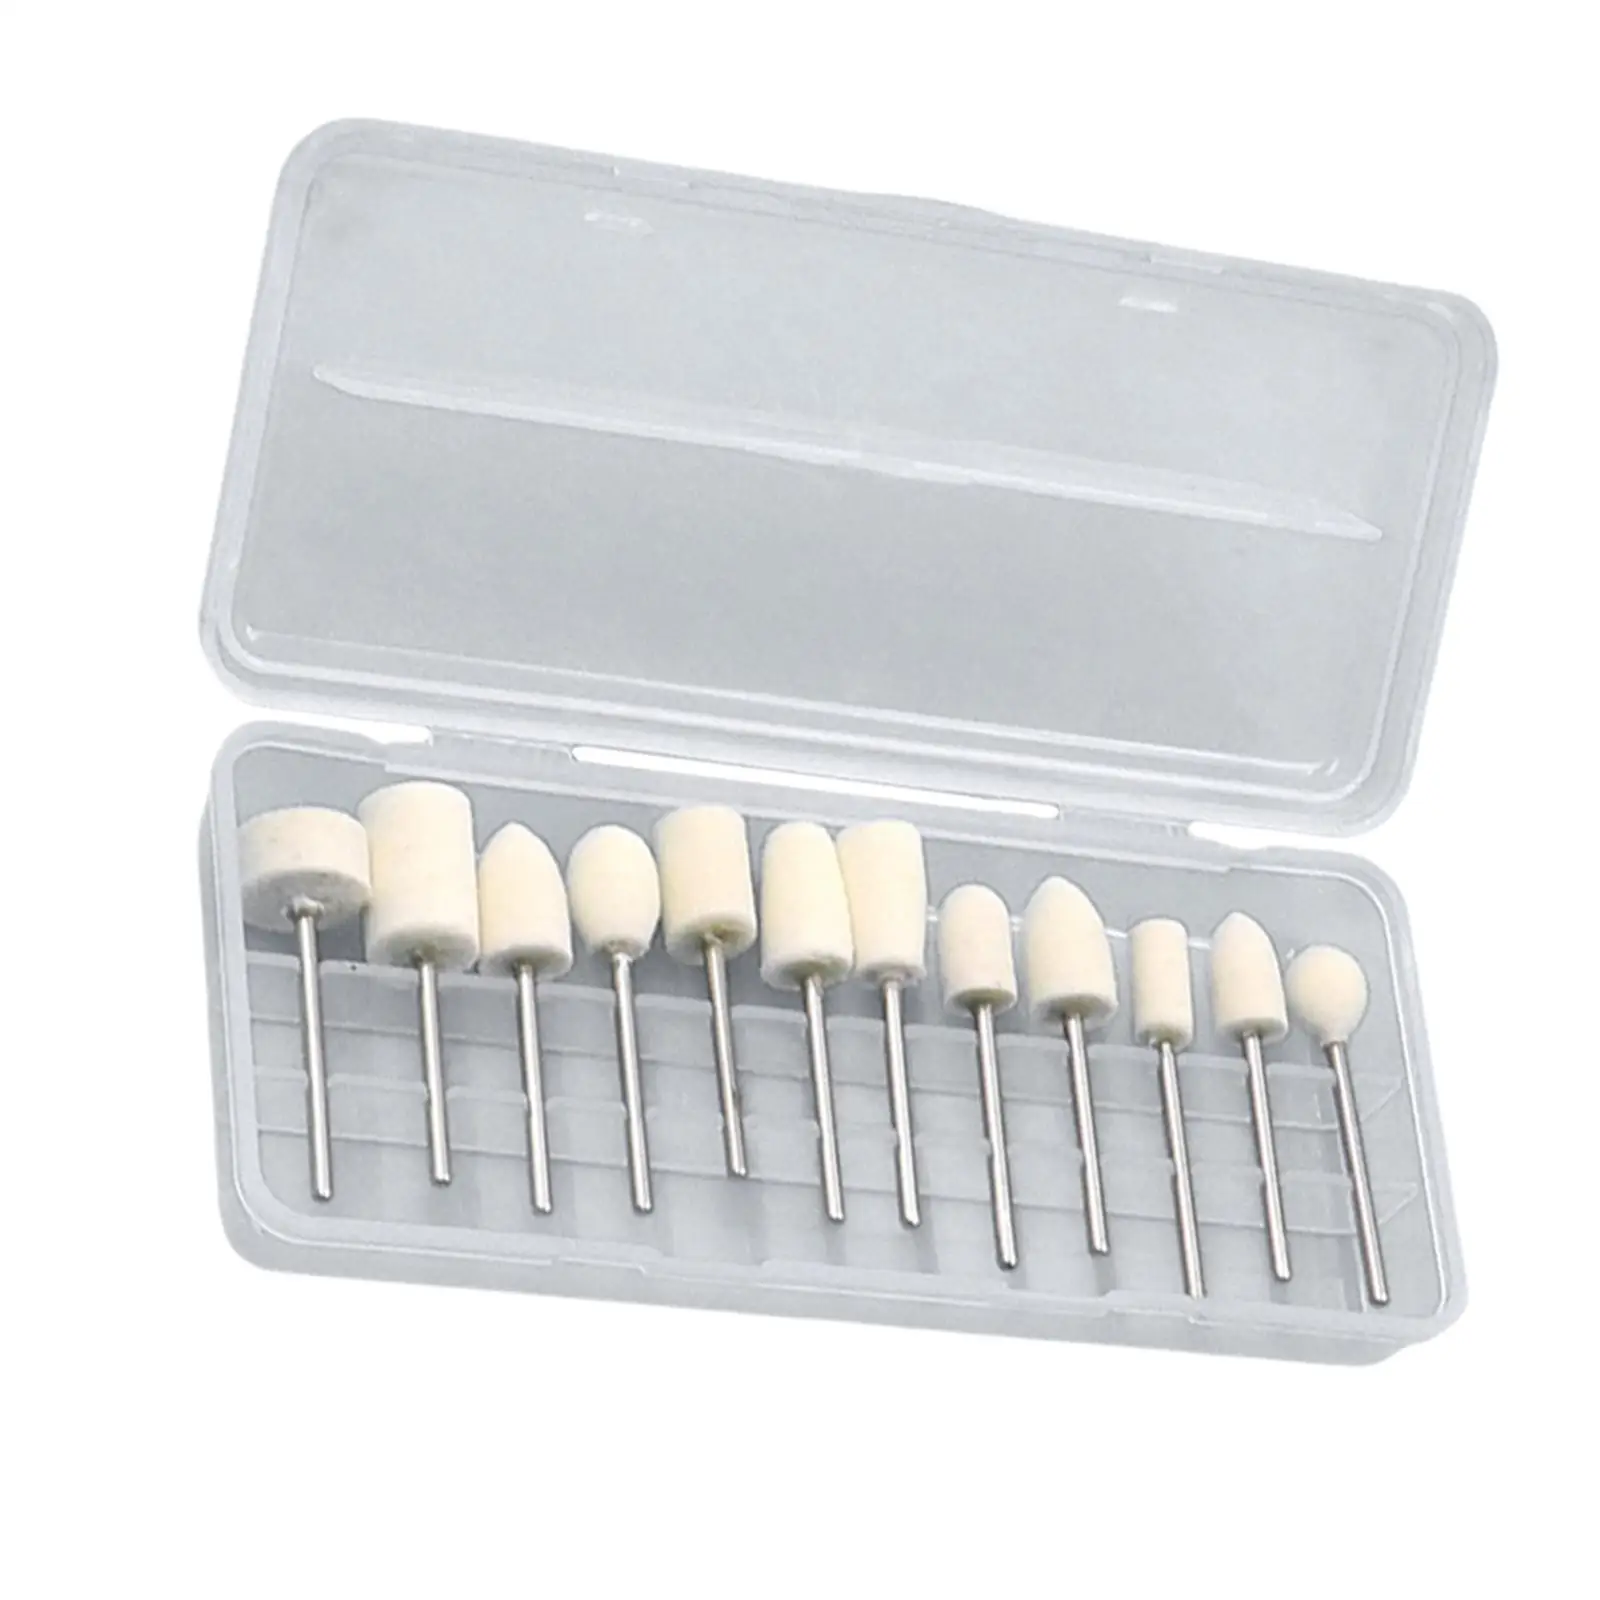 12x nail Grinding Polishing Head Kit with Case Grinding Barrel Head for Nail Art